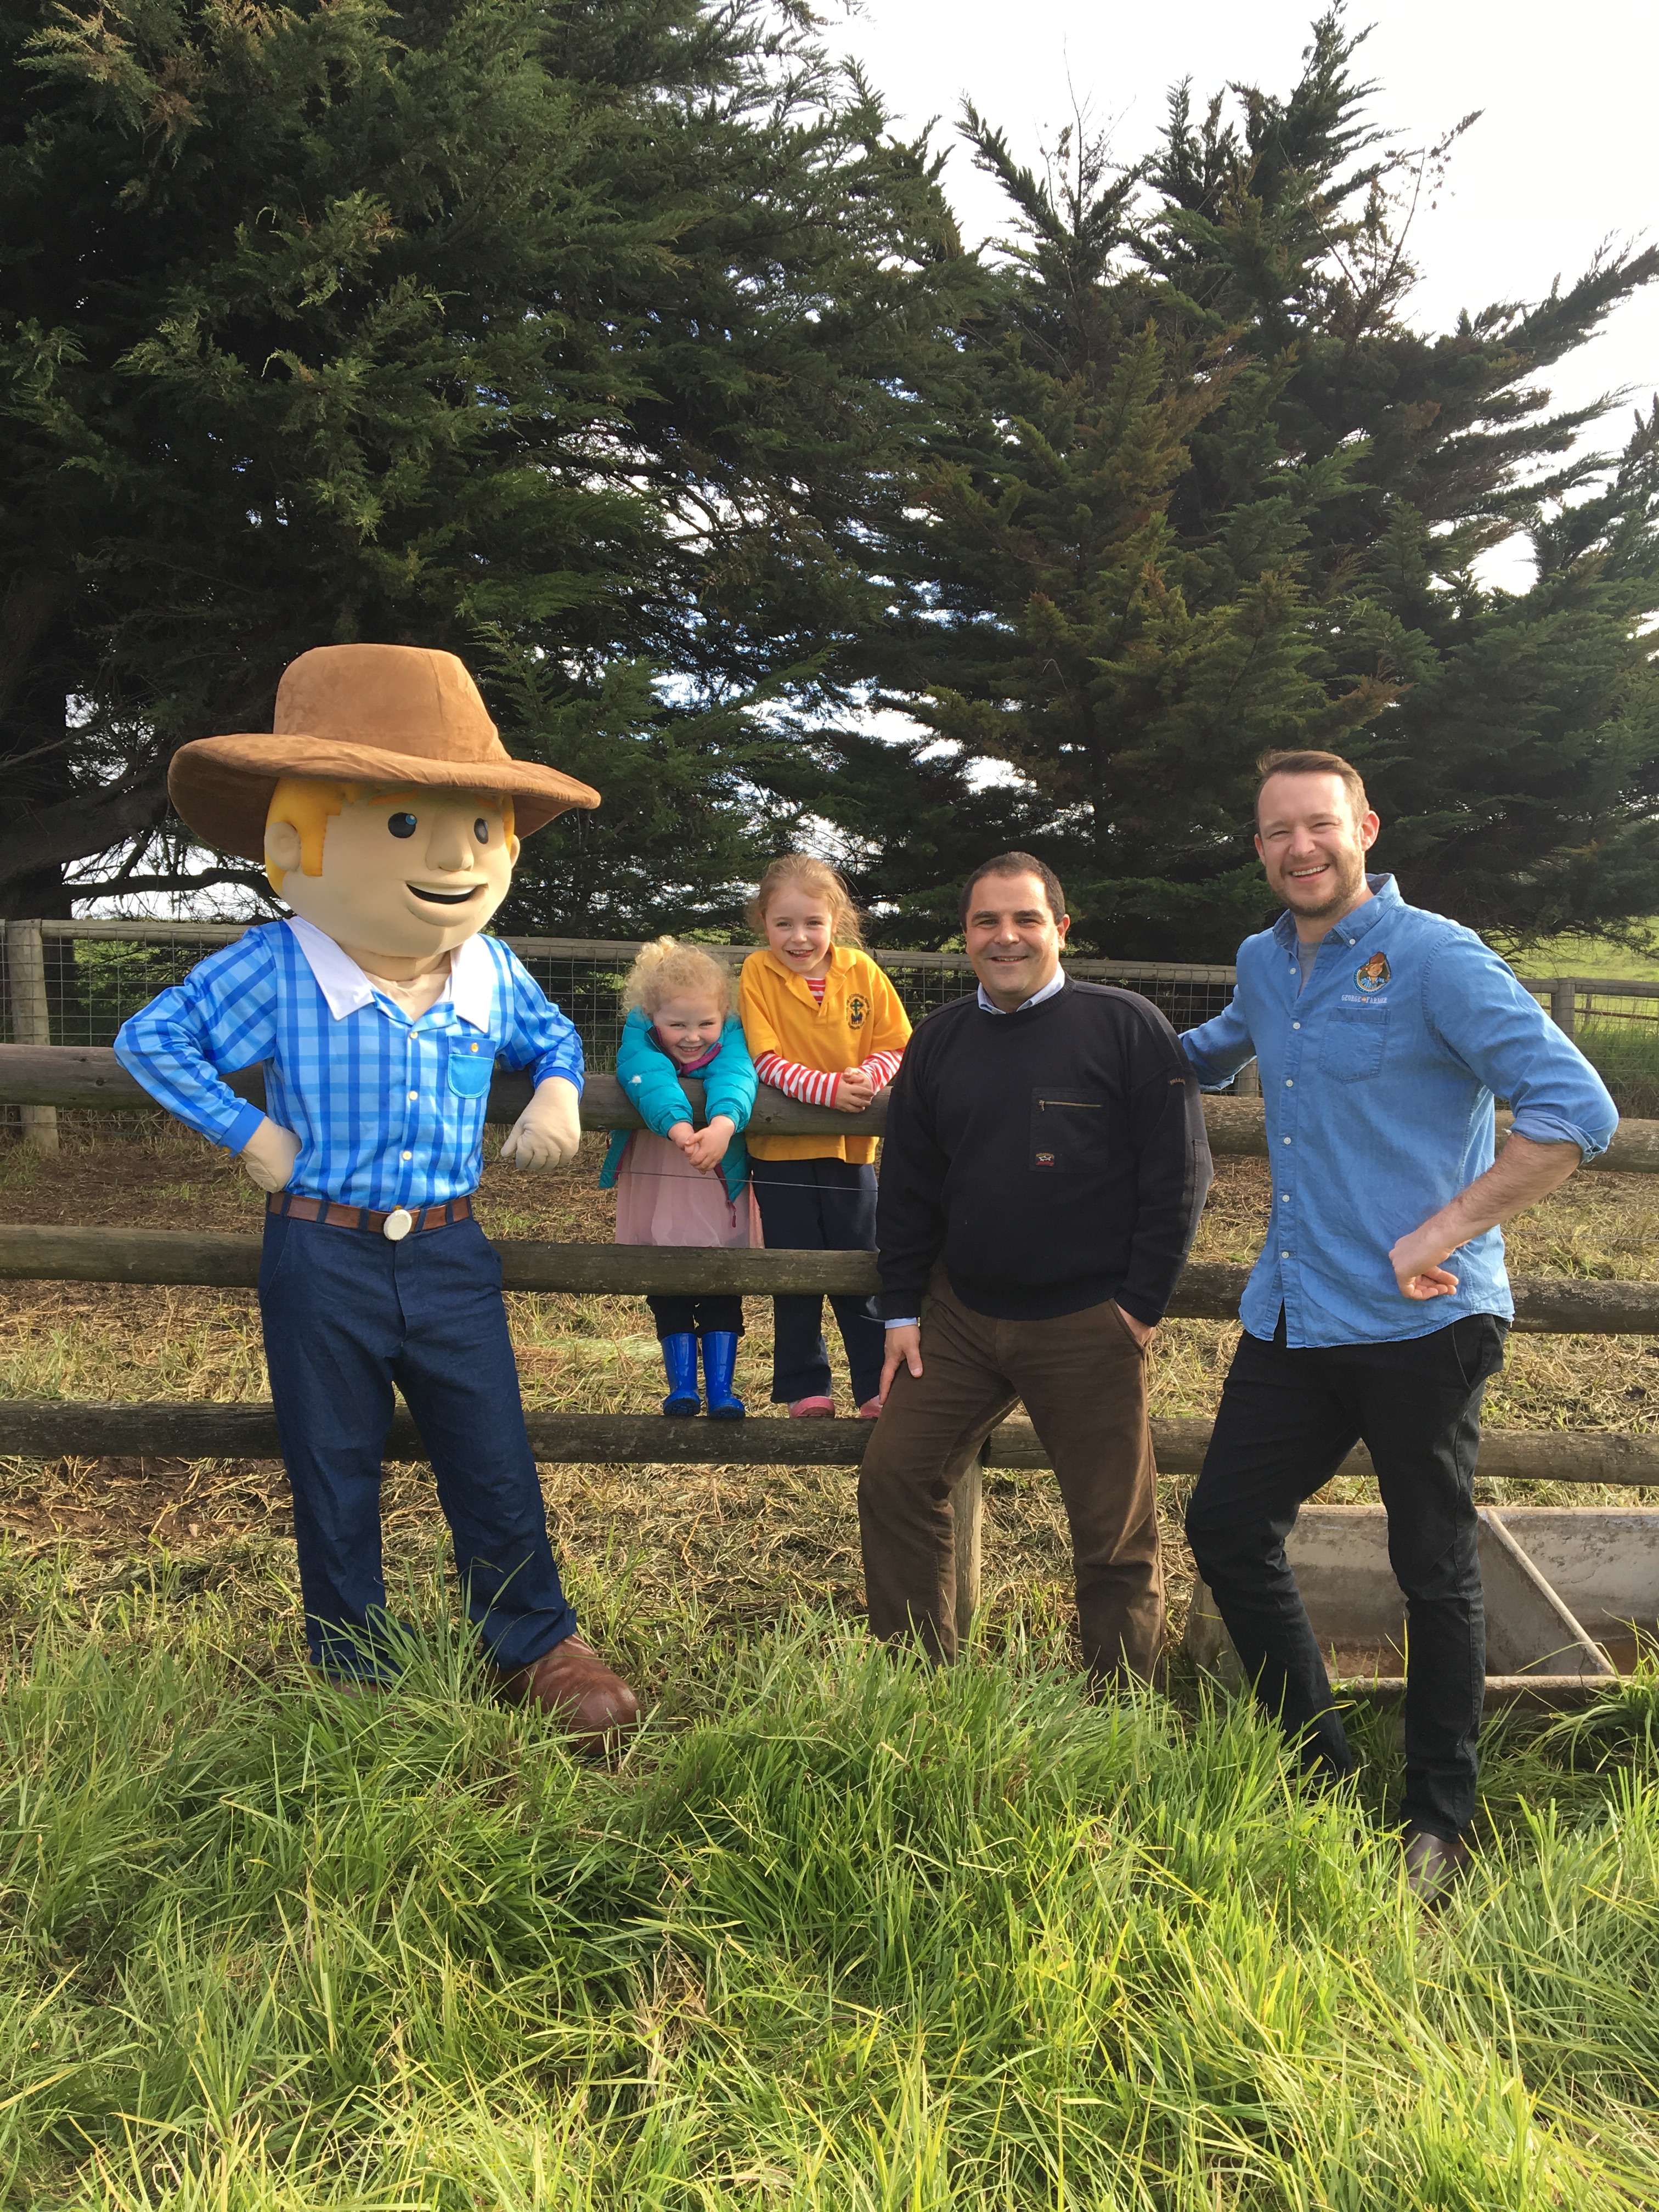 Pasin and George the Farmer join forces to promote National Farm Safety Week